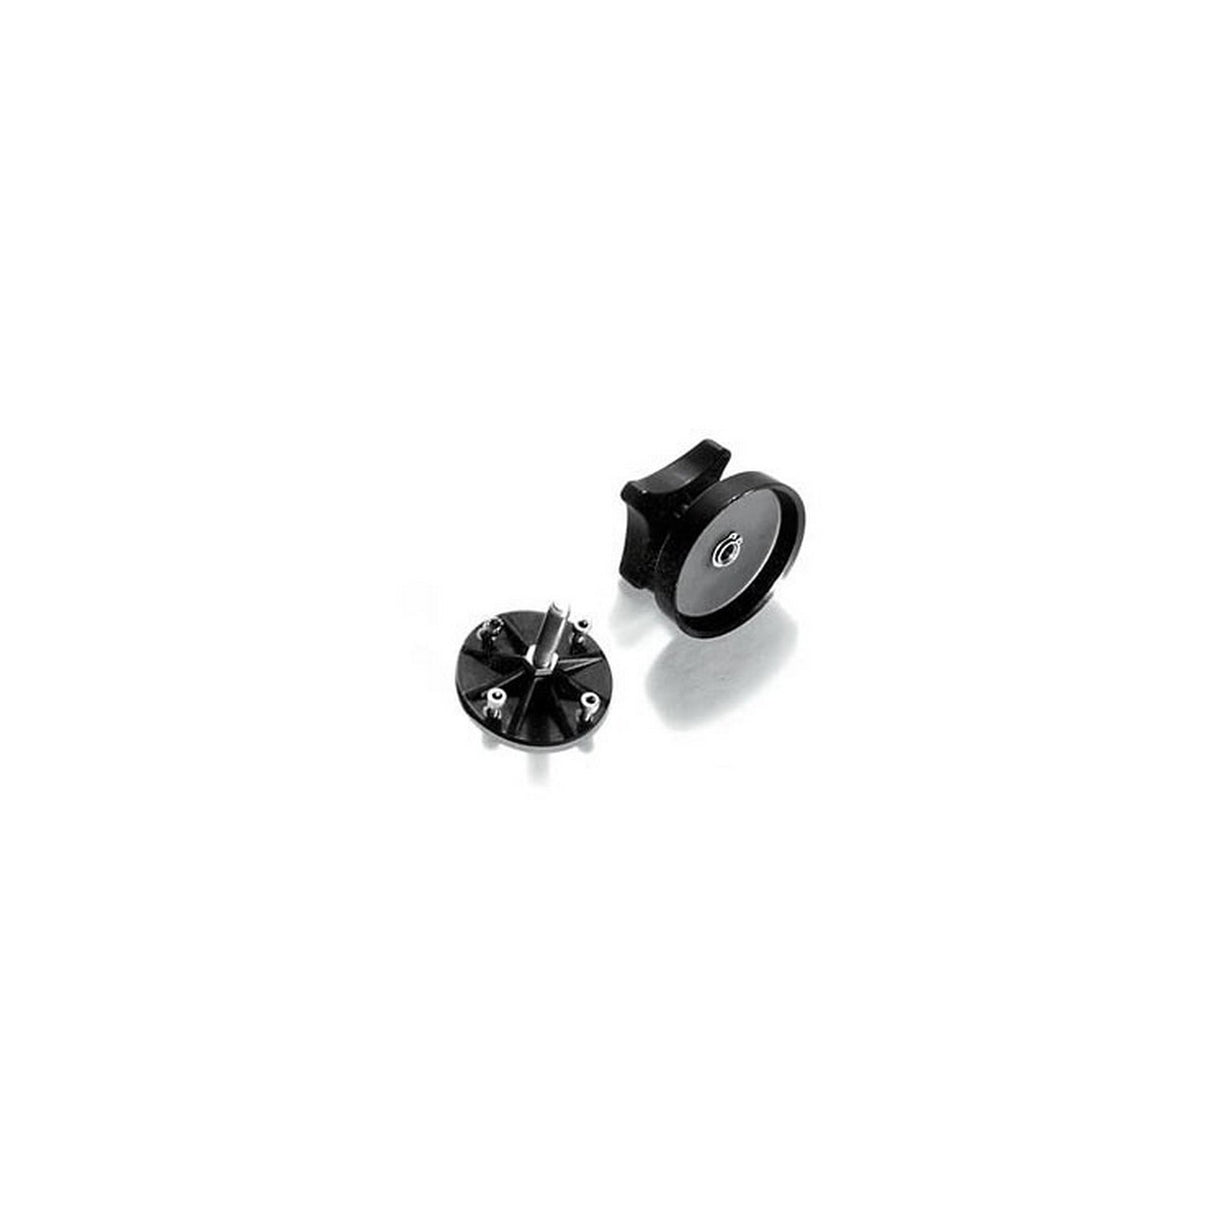 Sachtler 6052 | Ball Adapter With Screw for Fluid Heads